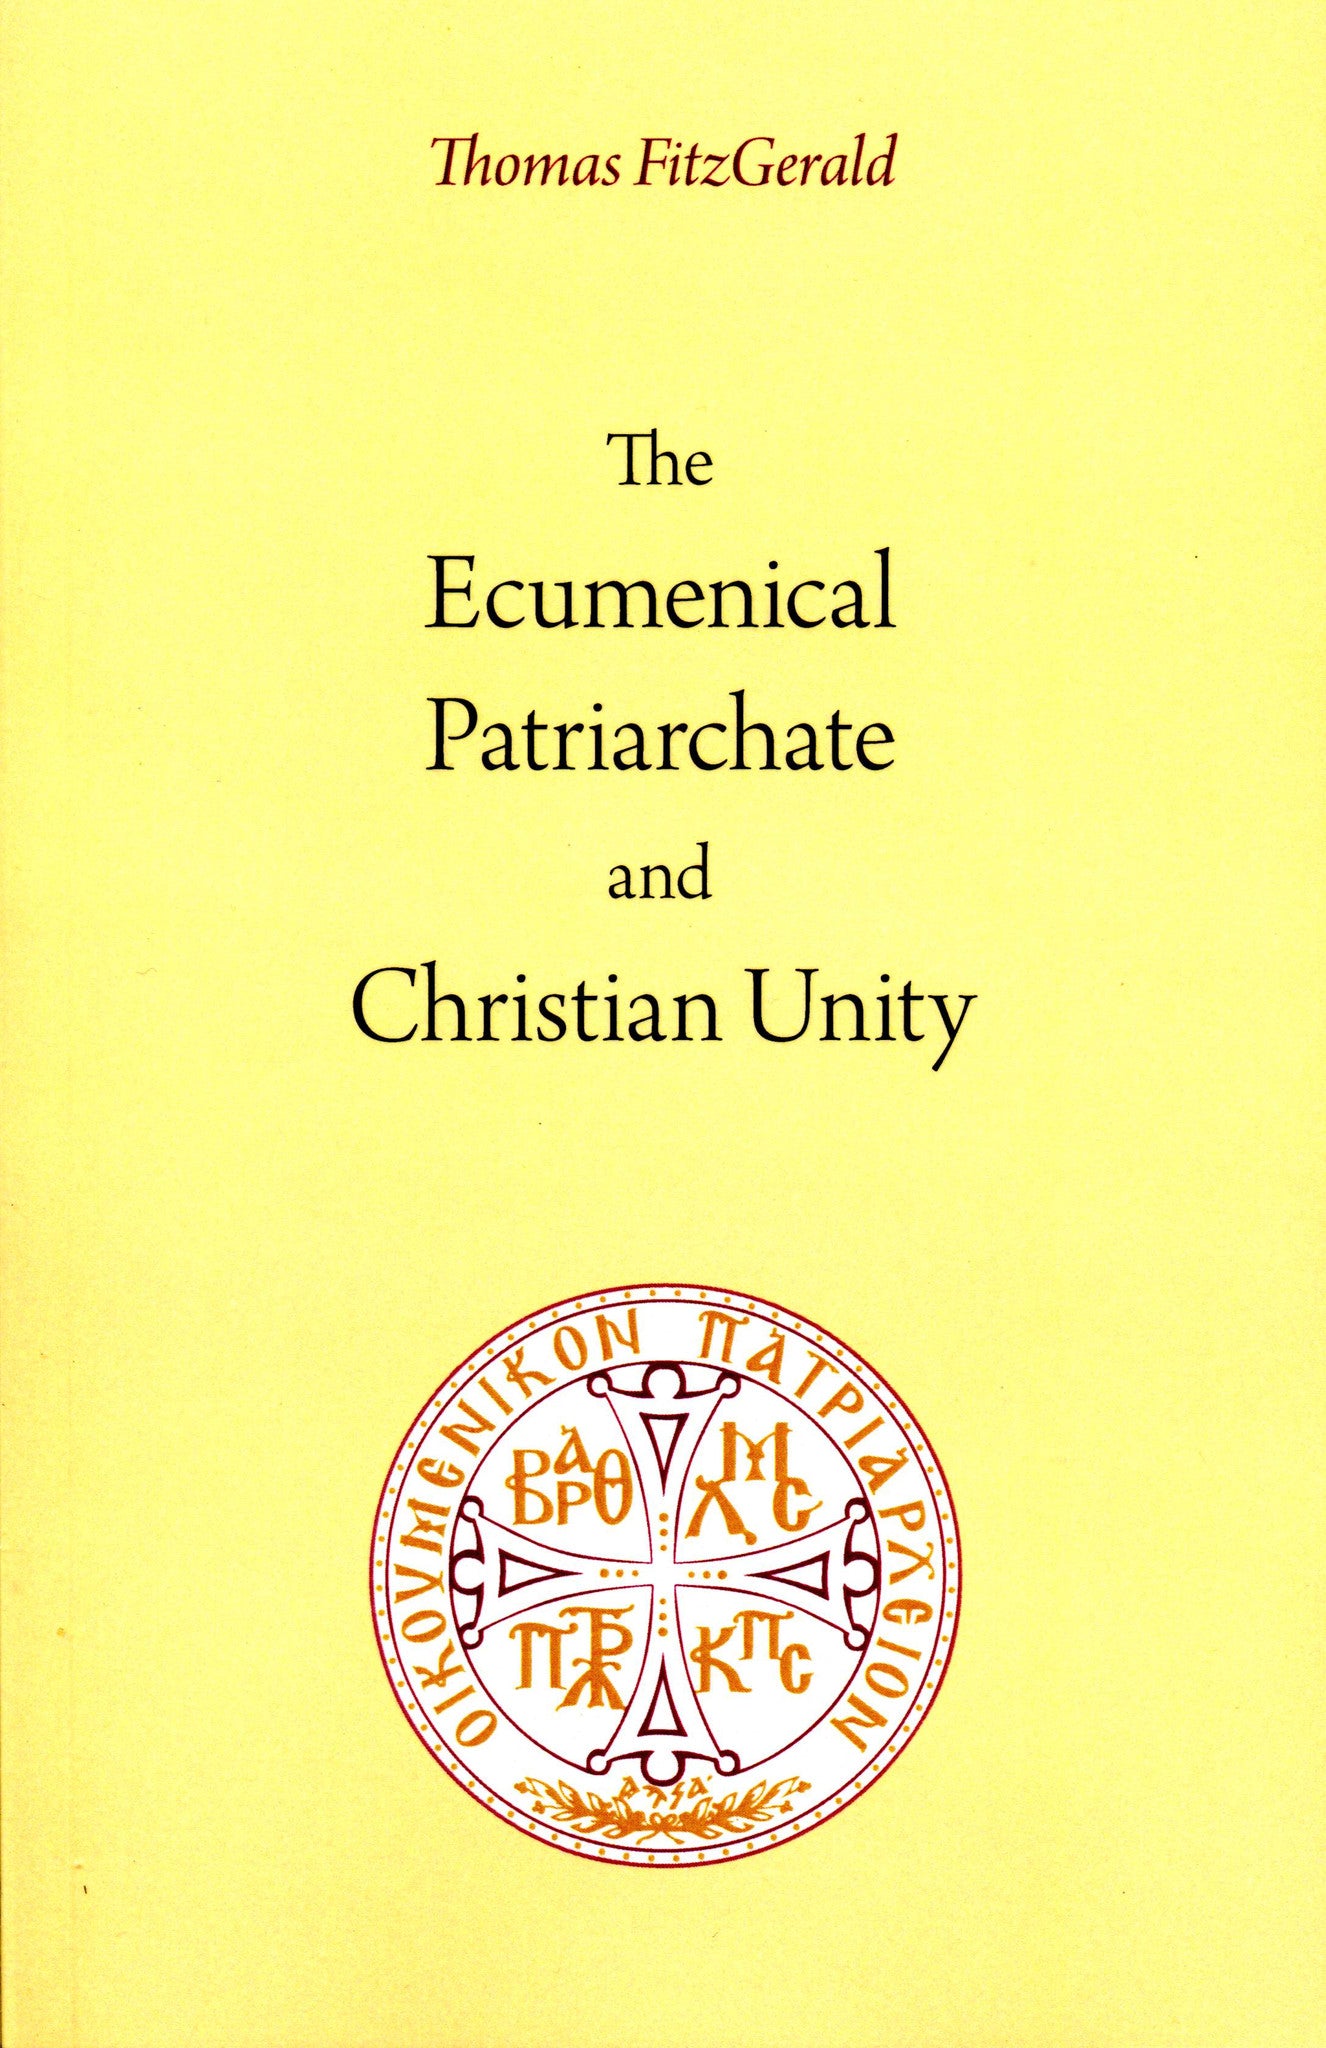 The Ecumenical Patriarchate and Christian Unity